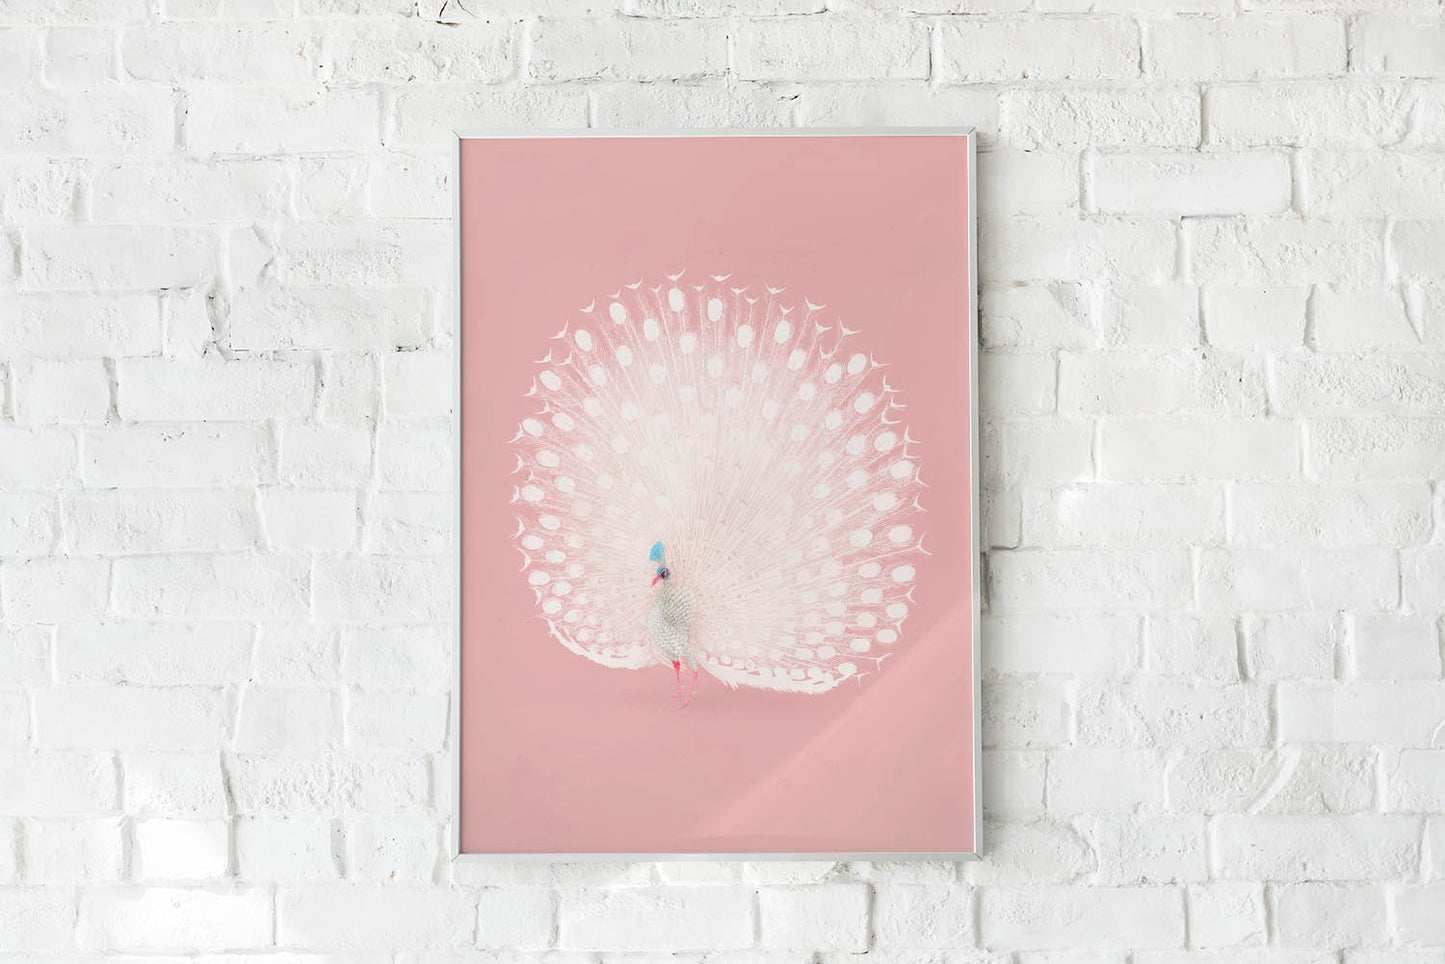 Japanese White Peacock remixed in Pink